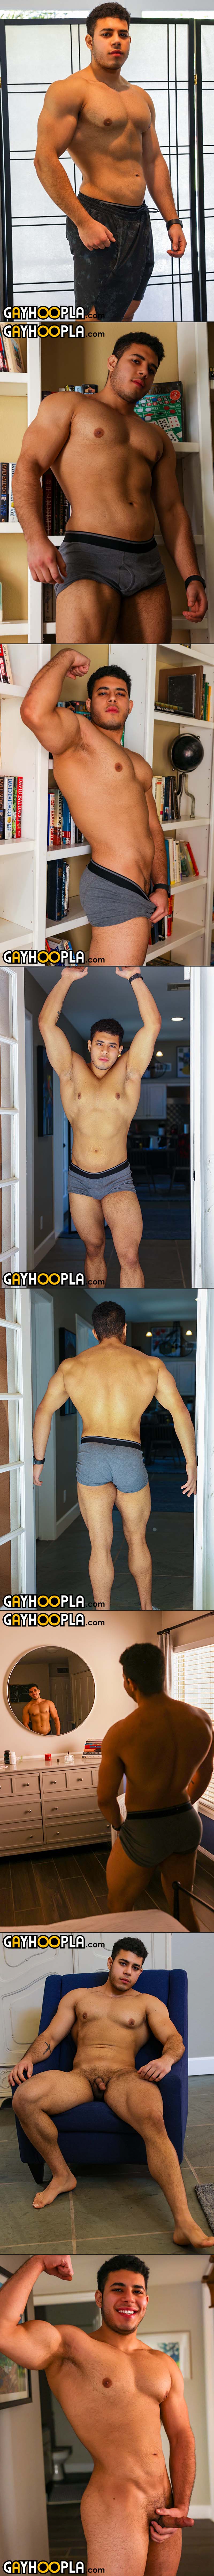 Jace Jenkins' Sexy Study Break and Explosive Climax at GayHoopla